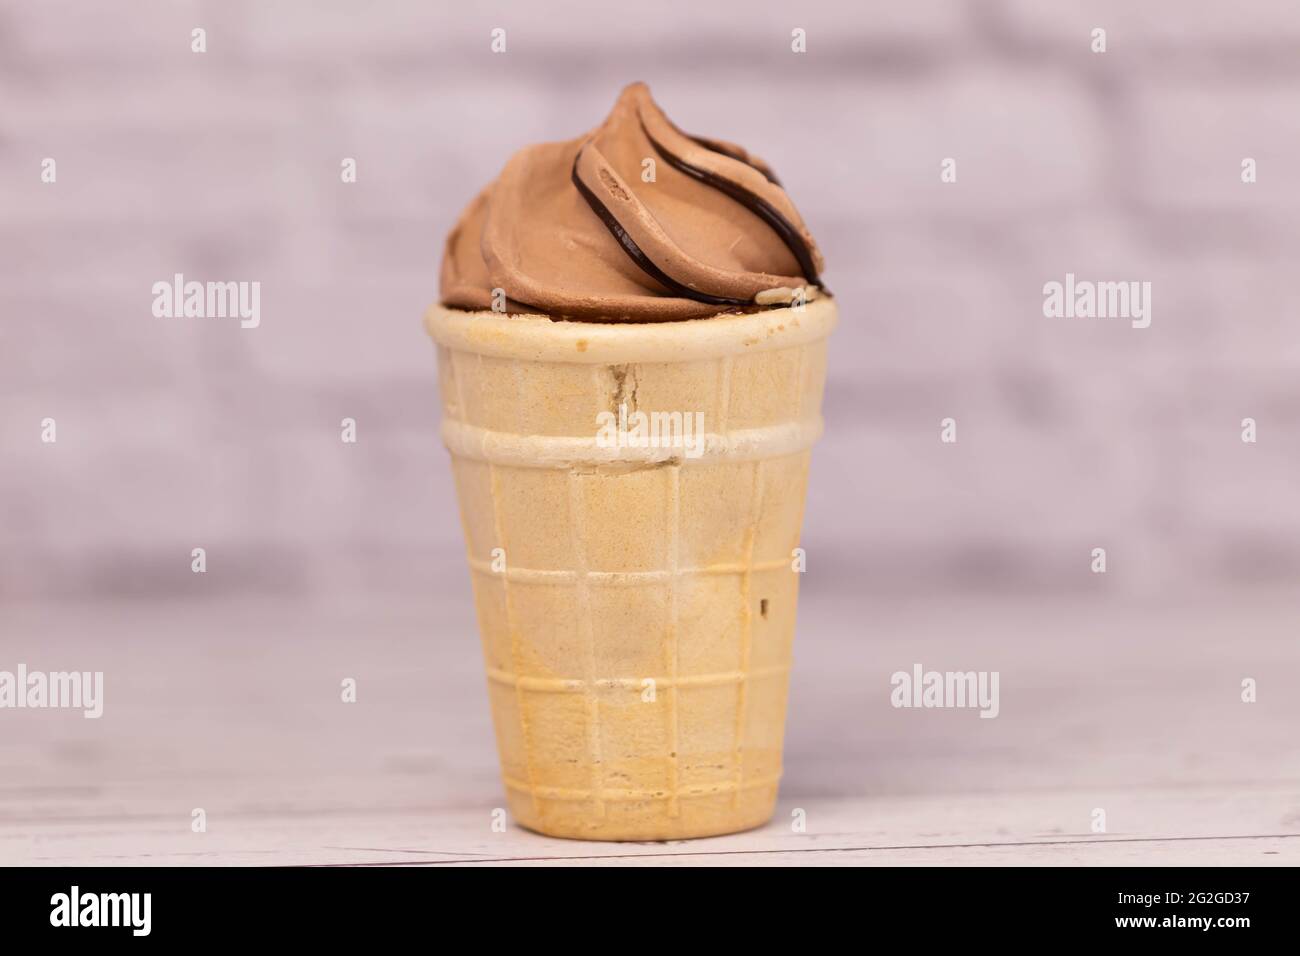 Delicious chocolate ice cream in a crispy waffle cup. Dessert Stock Photo